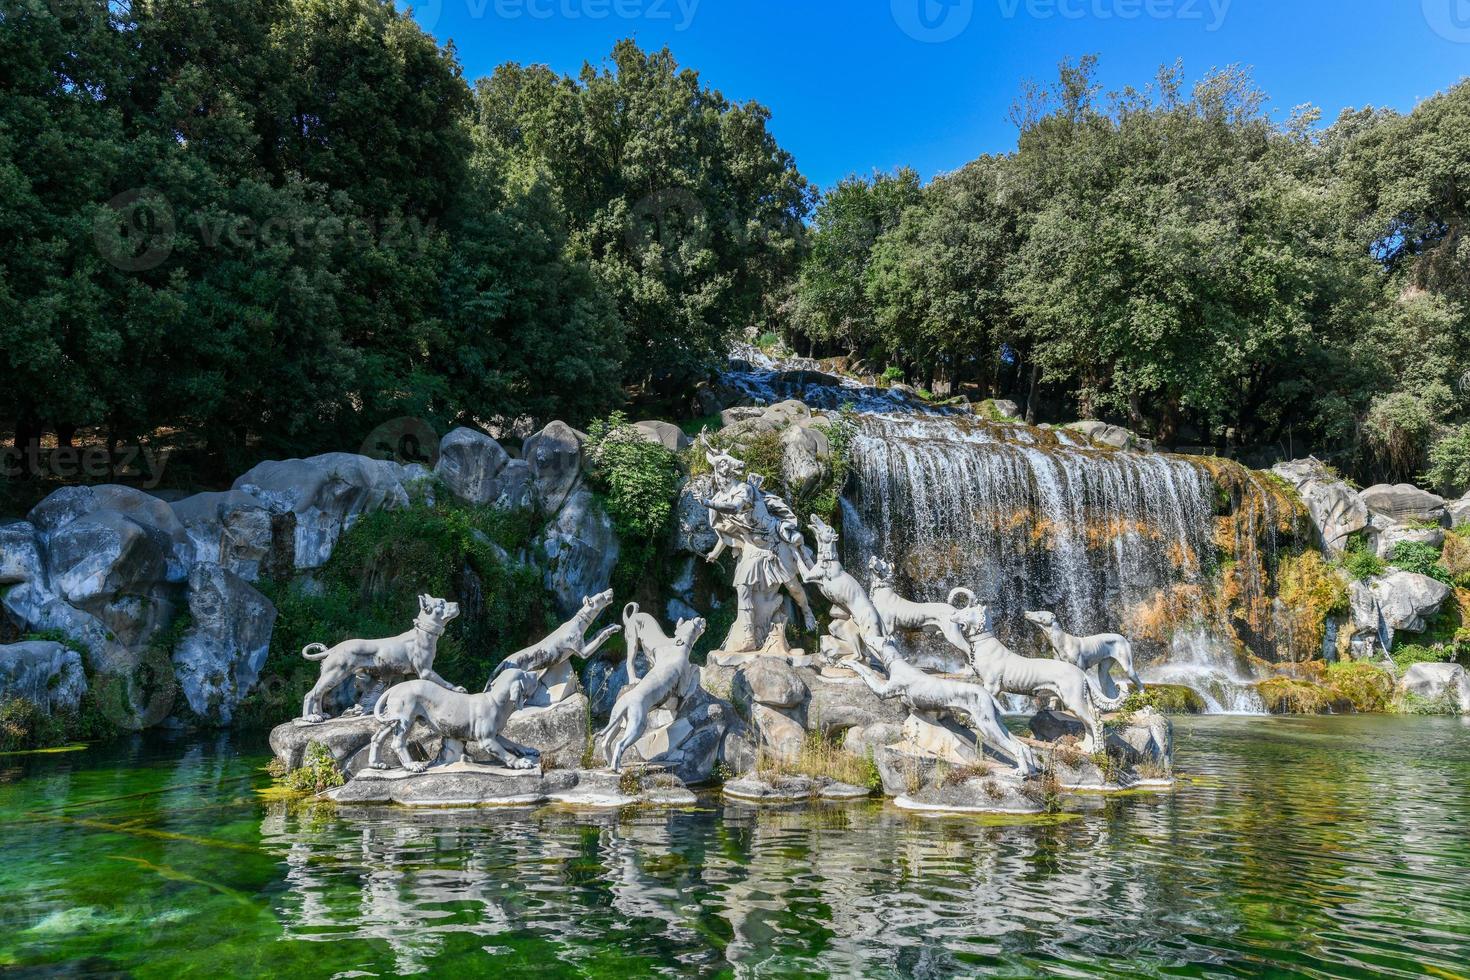 The Royal Palace of Caserta  Italian, Reggia di Caserta  is a former royal residence in Caserta, southern Italy, and was designated a UNESCO World Heritage Site. photo